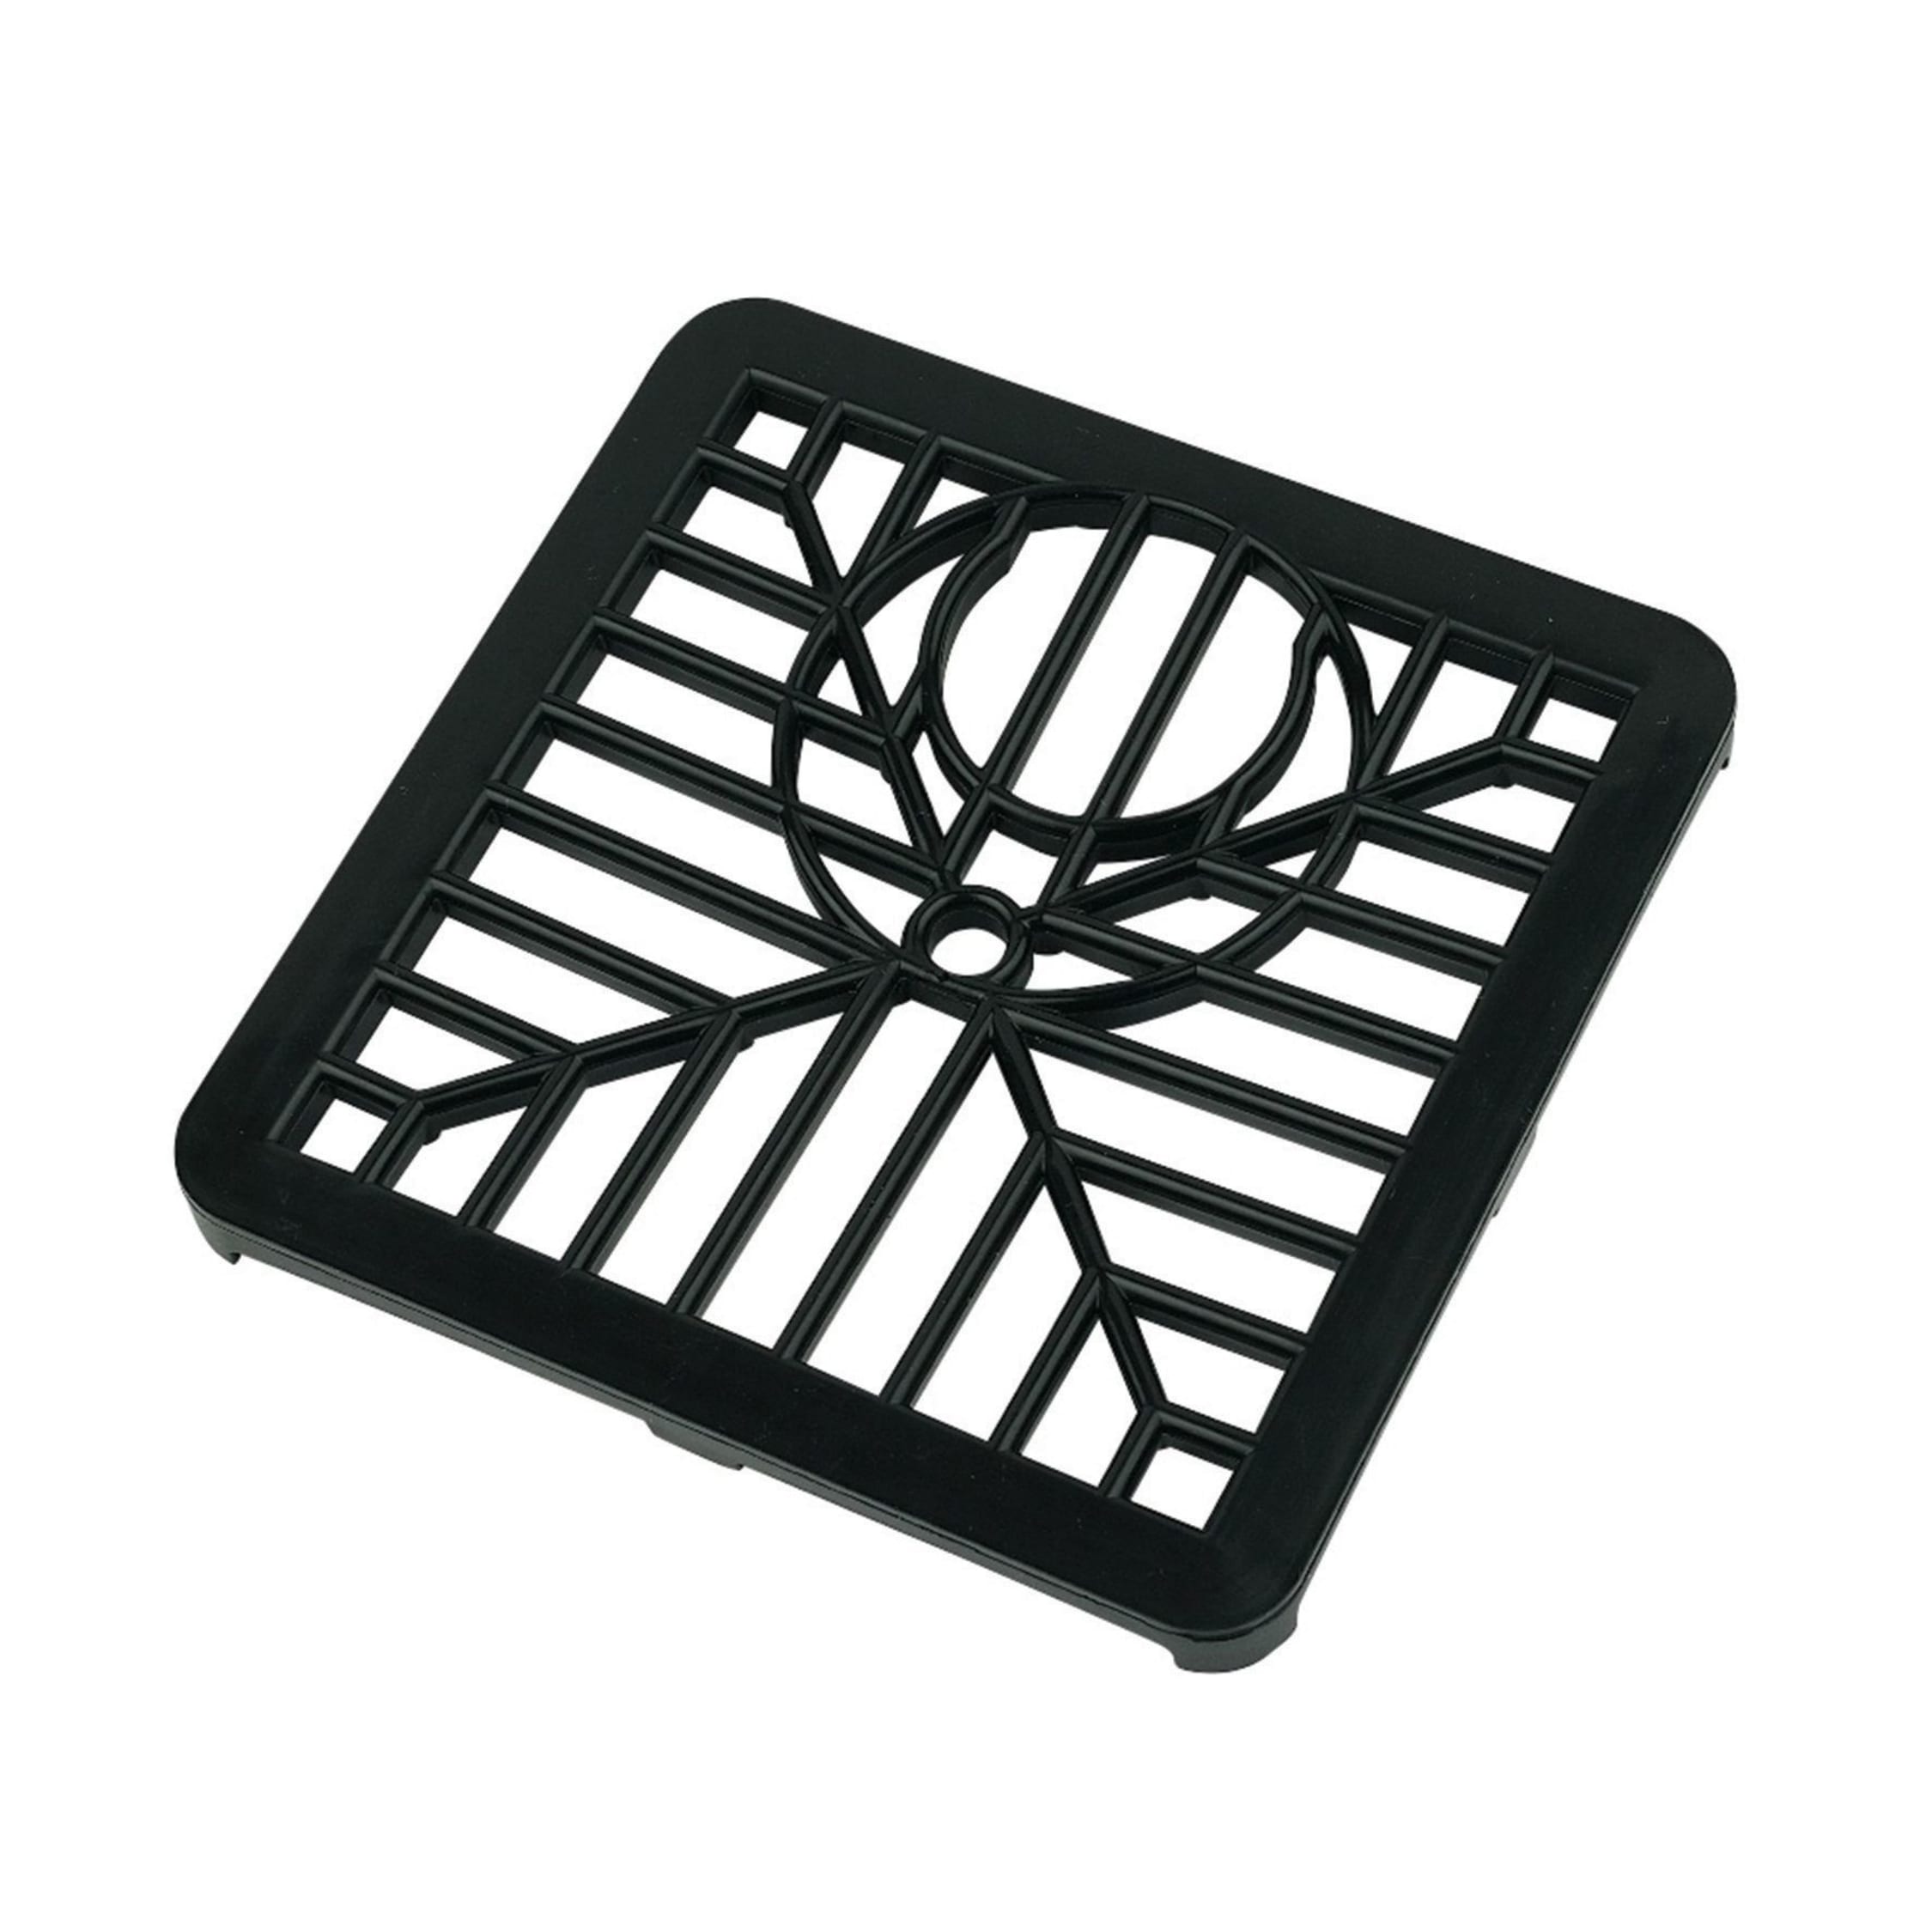 6 inch 150mm Black Bulk Hardware BH02807 Plastic Gulley Grid Square Pack of 2